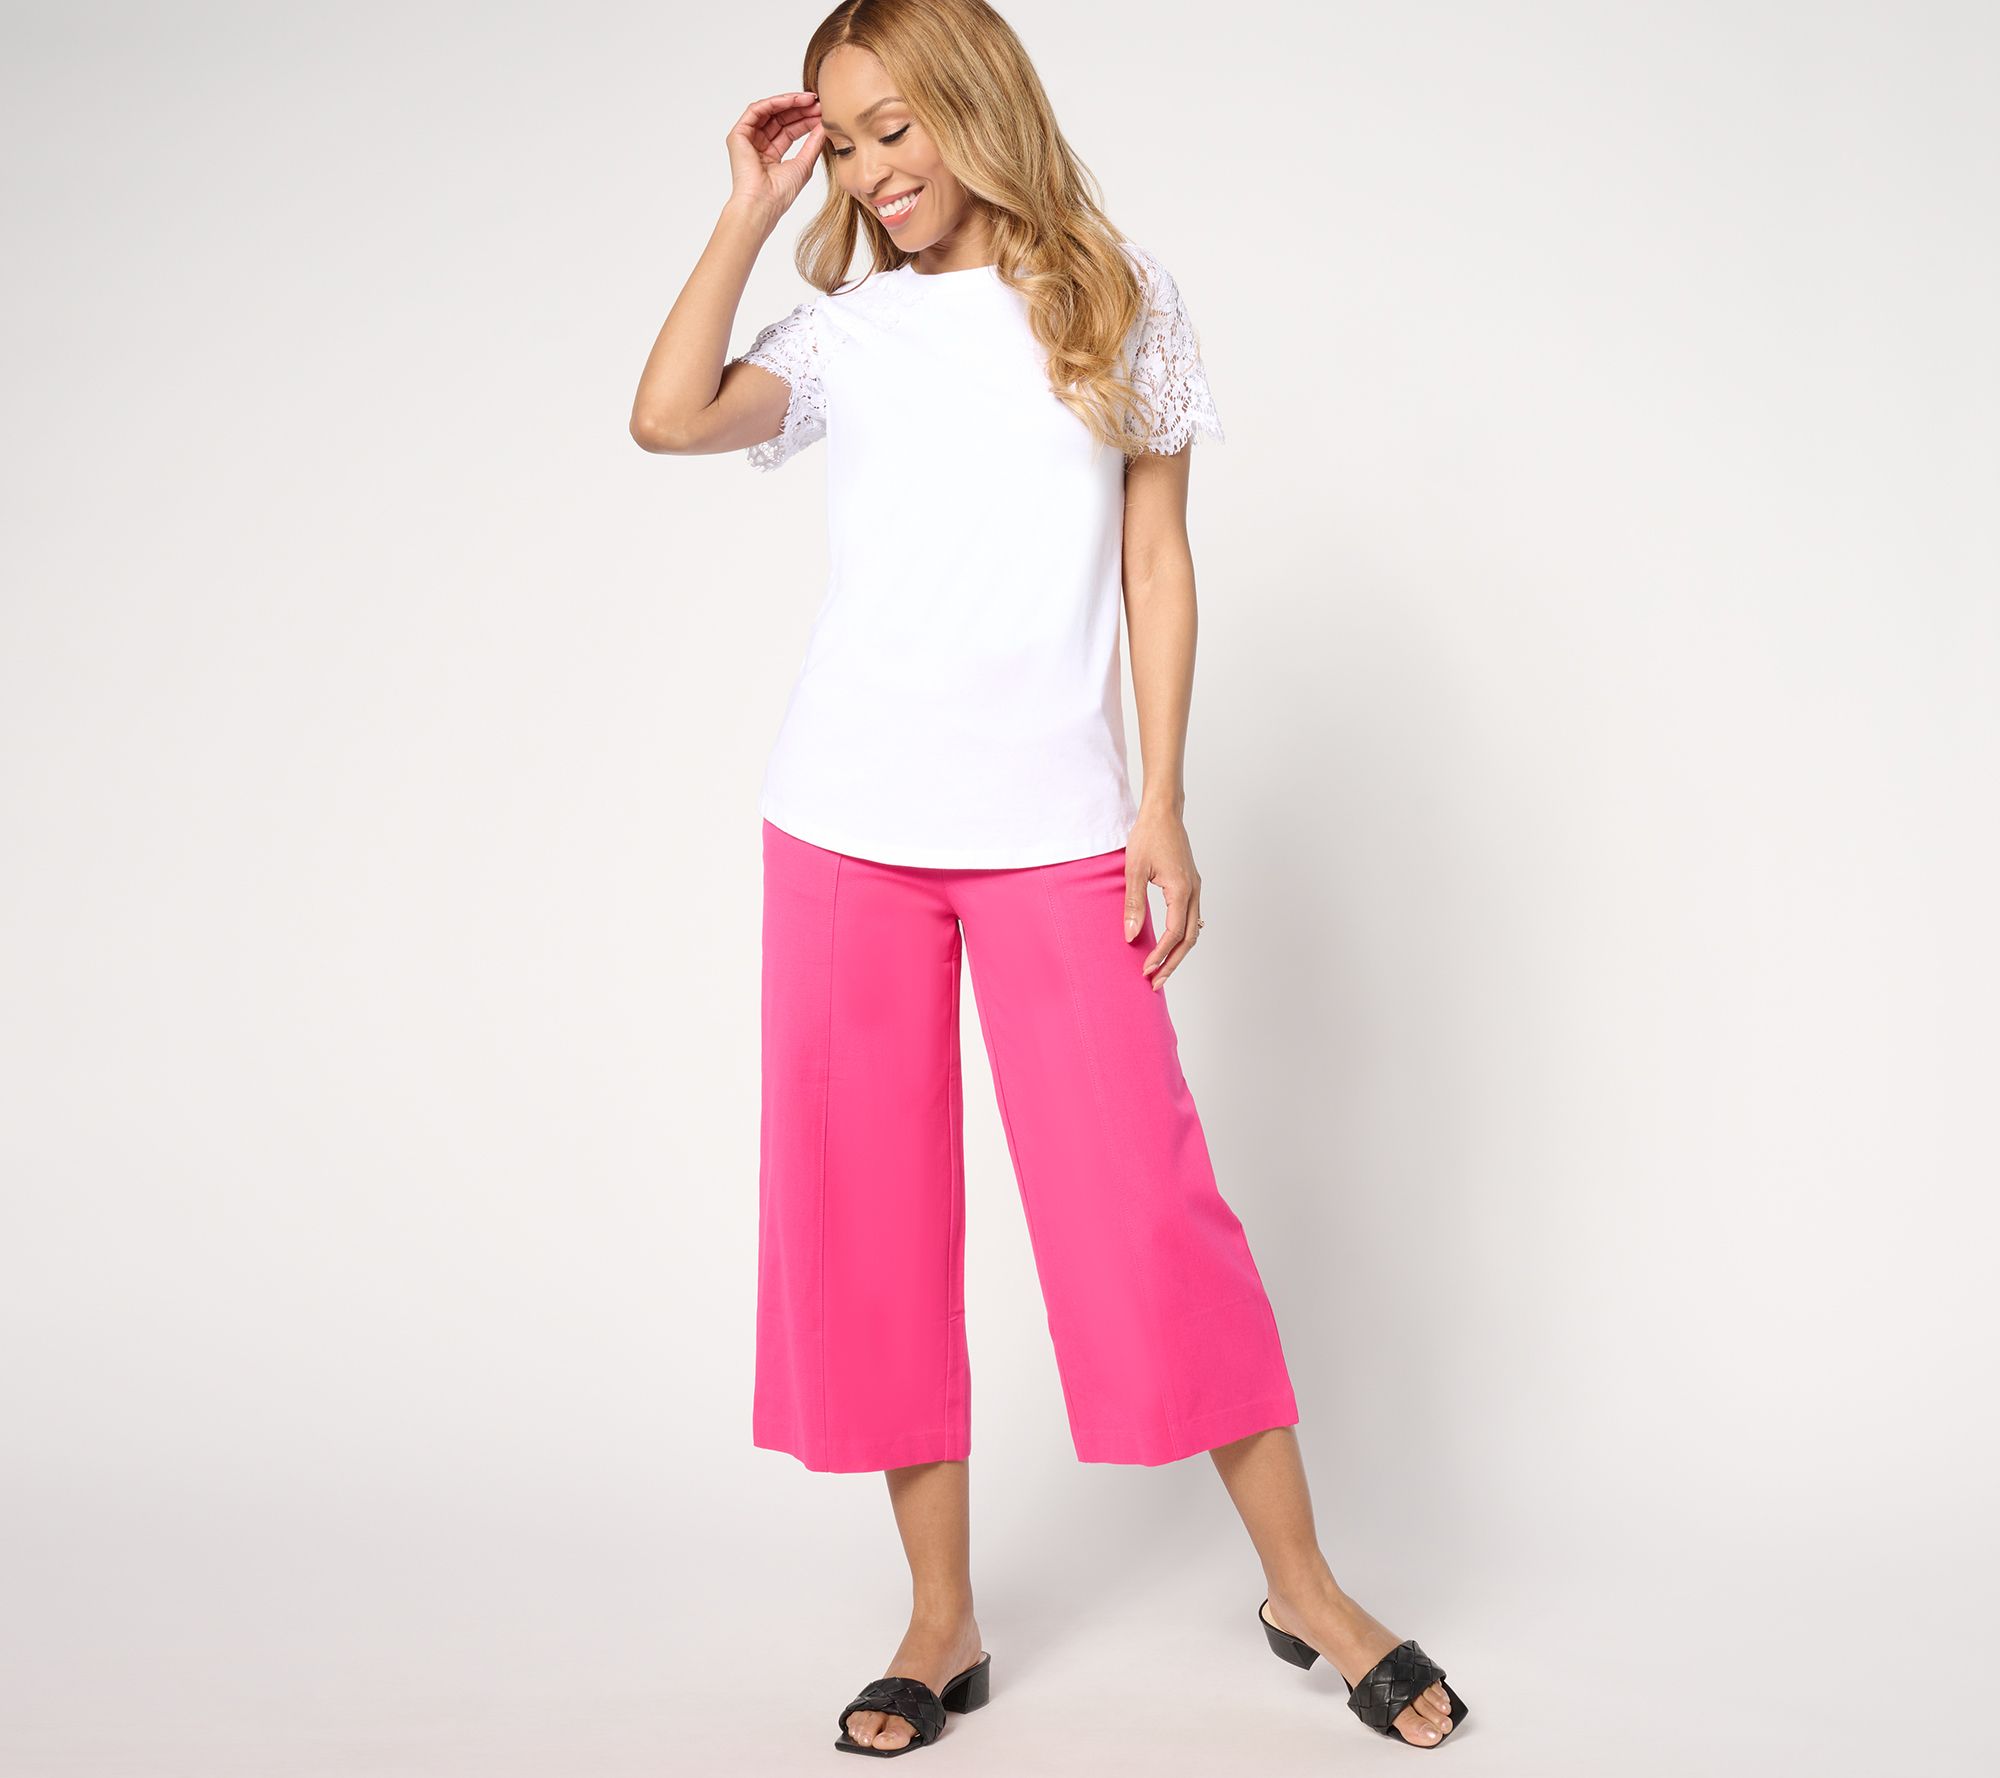 ISaac Mizrahi Live! Petite 24/7 Stretch Culottes with Seam Detail